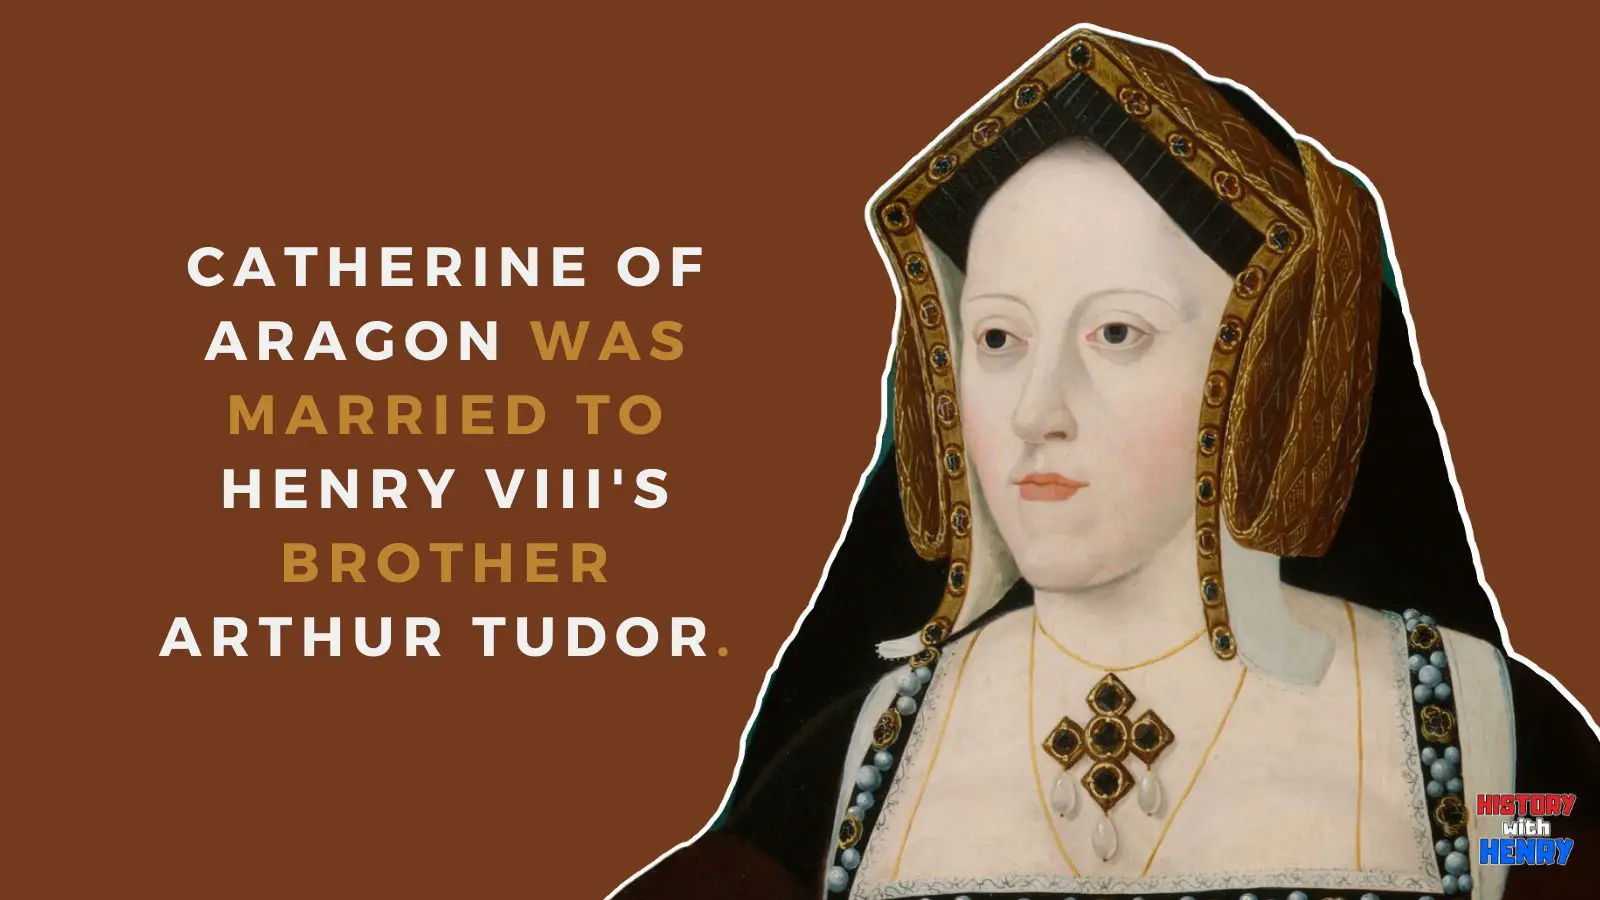 12 Facts about Catherine of Aragon